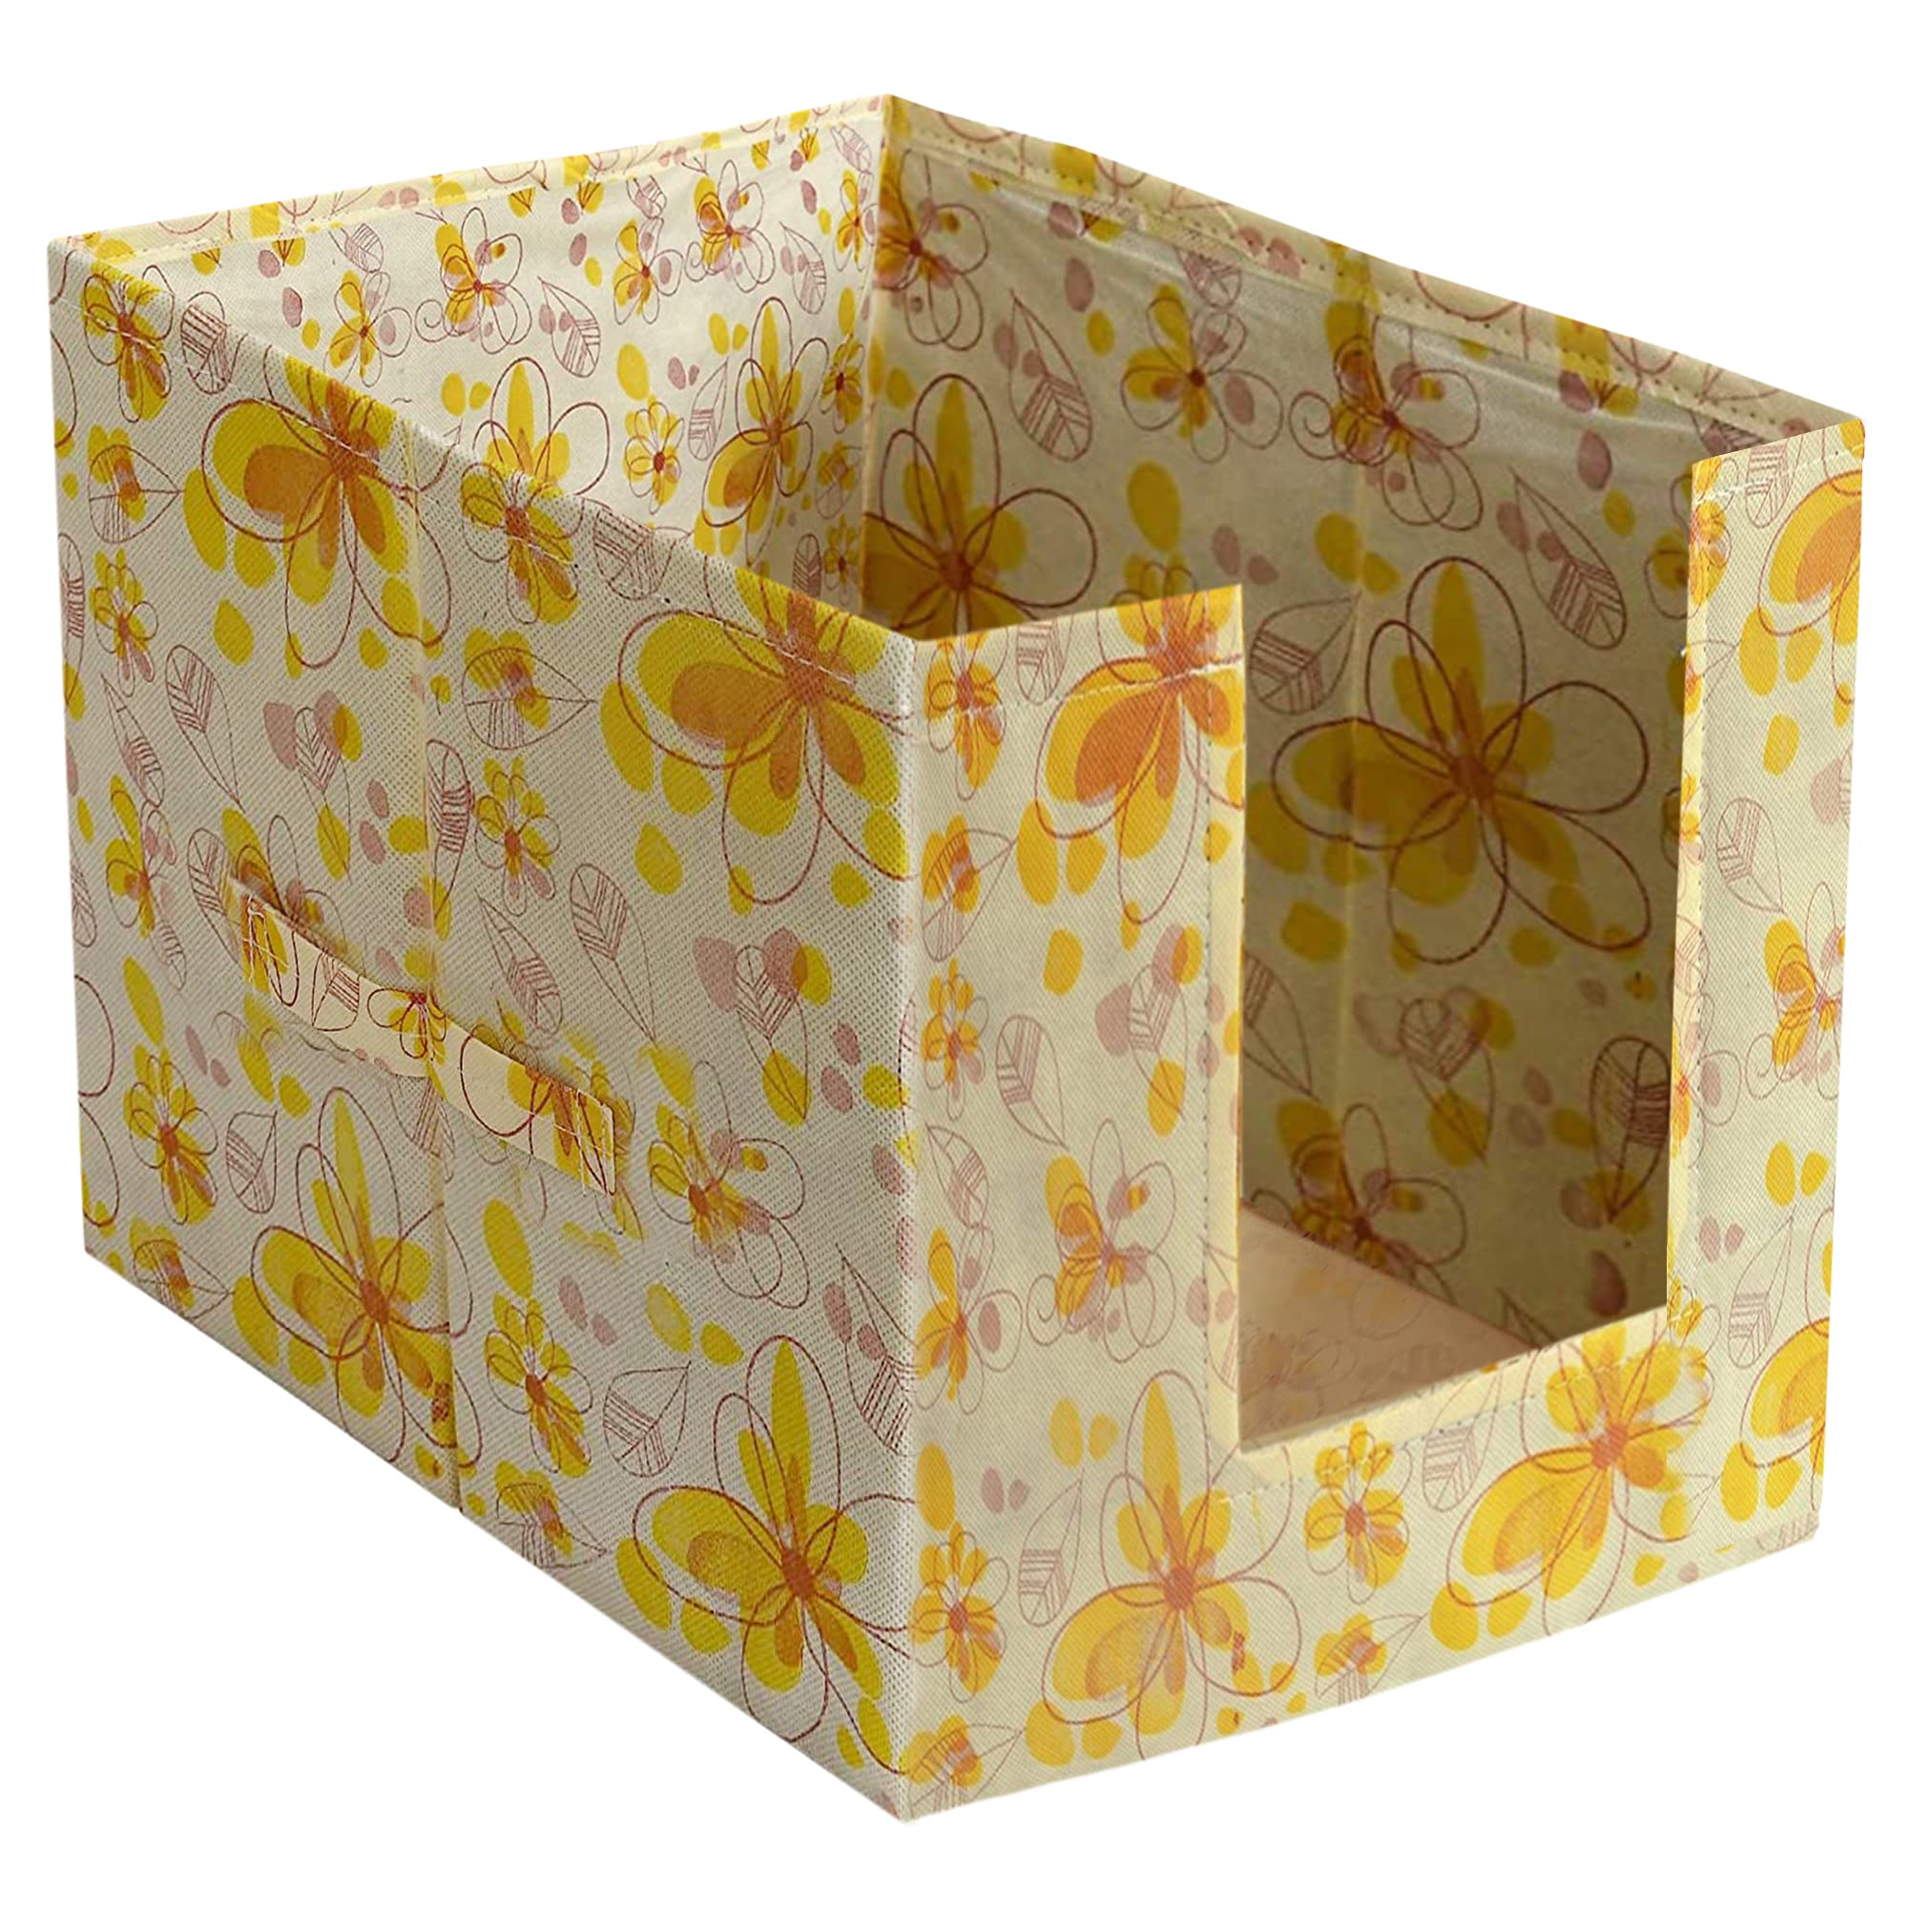 Kuber Industries Women's Rectangular Saree Organizer for Wardrobe/Closet Storage Box and Clothing Organiser Clothes with Flower Design- Pack of 3 (Yellow)